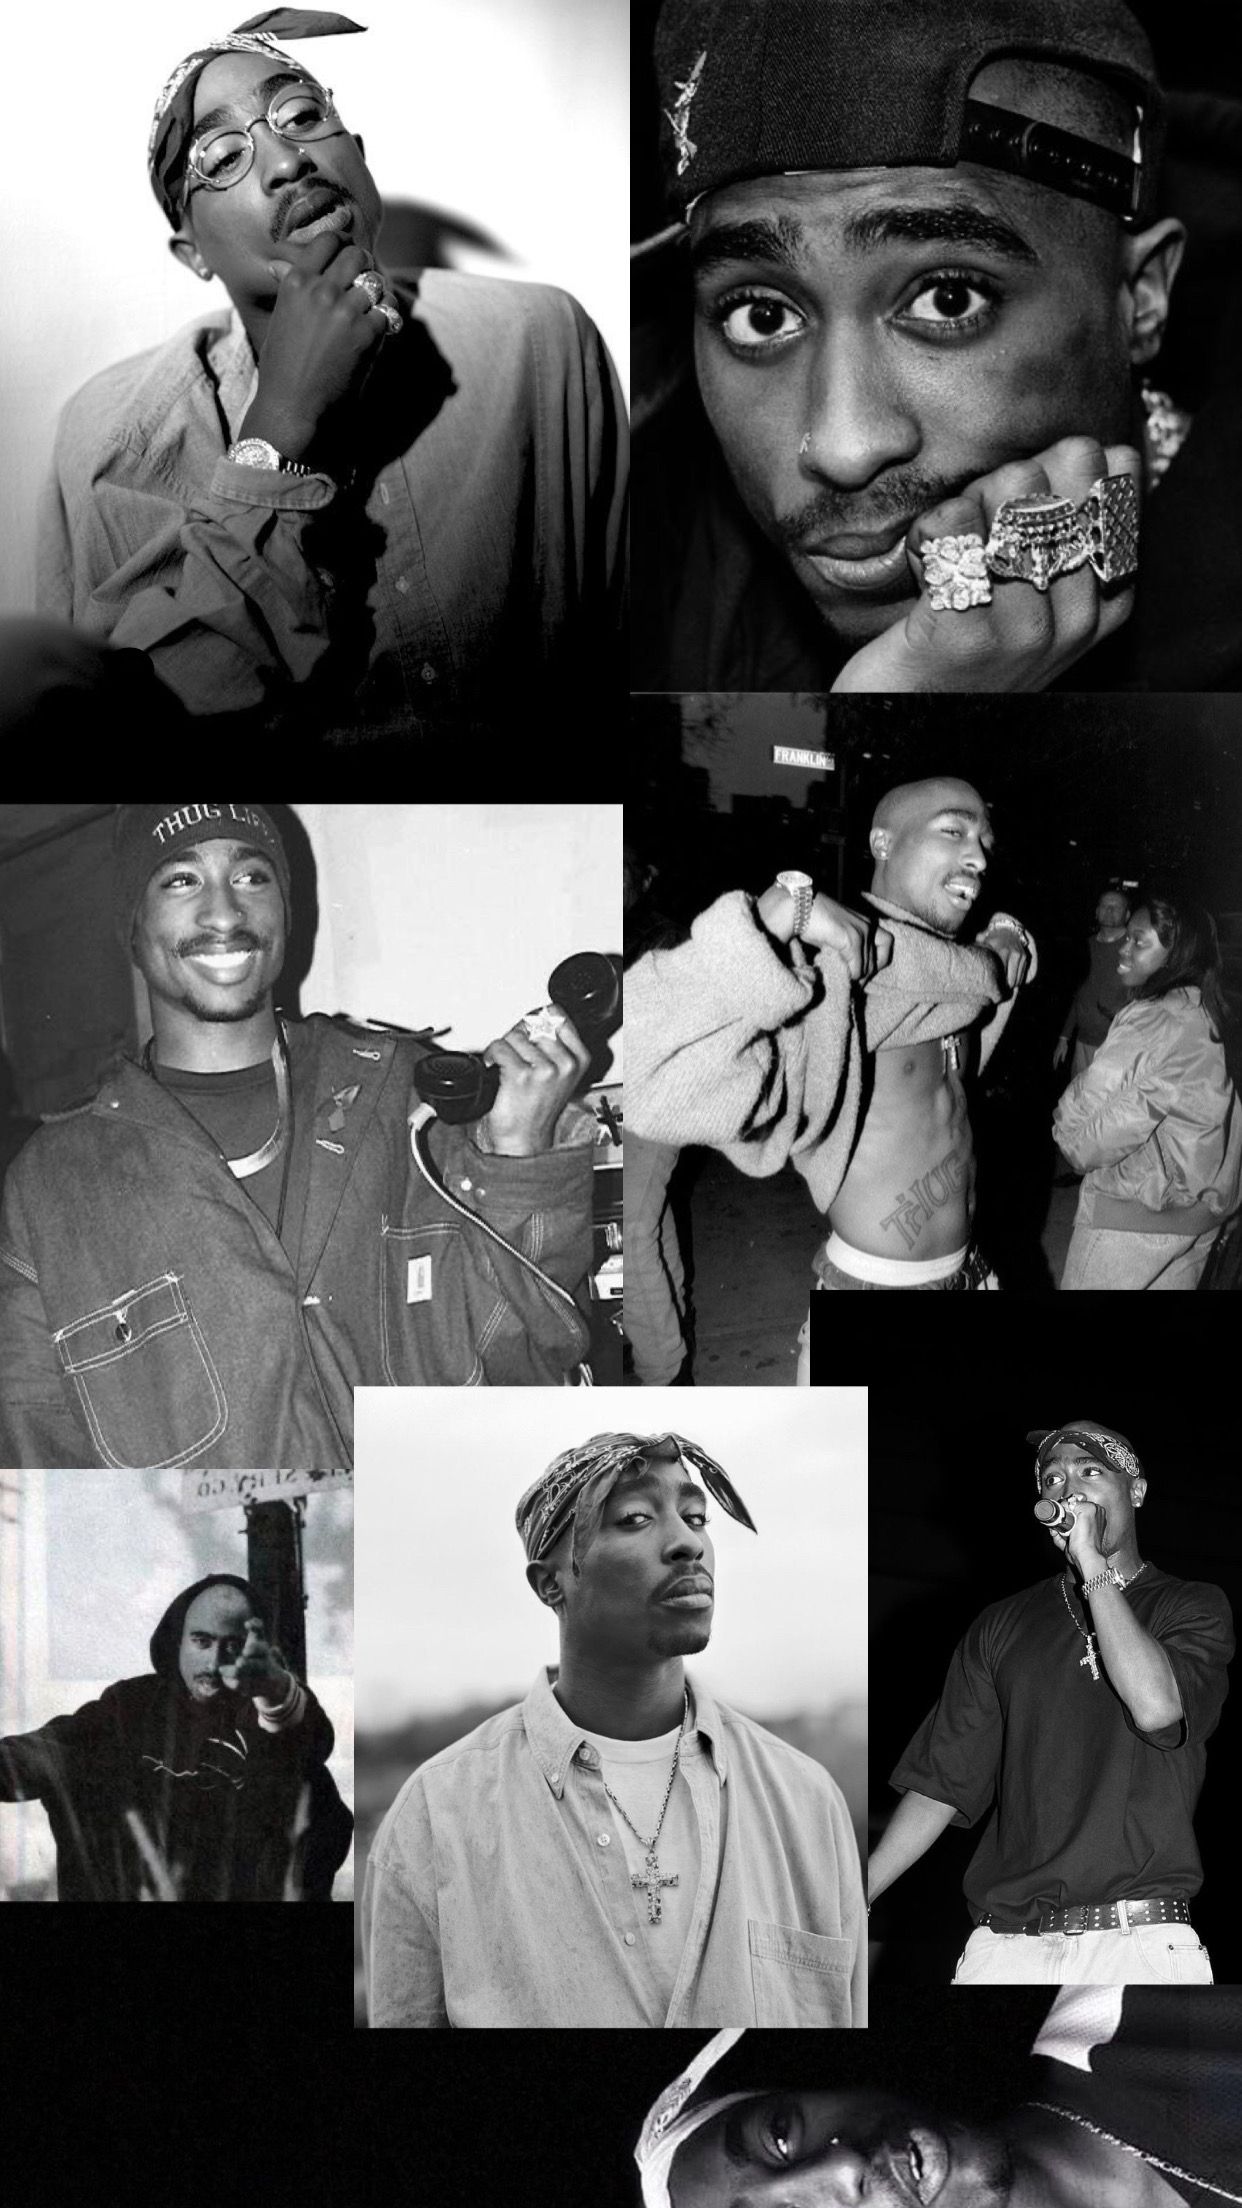 2pac black and white wallpaper. Tupac picture, Tupac wallpaper, Hip hop poster